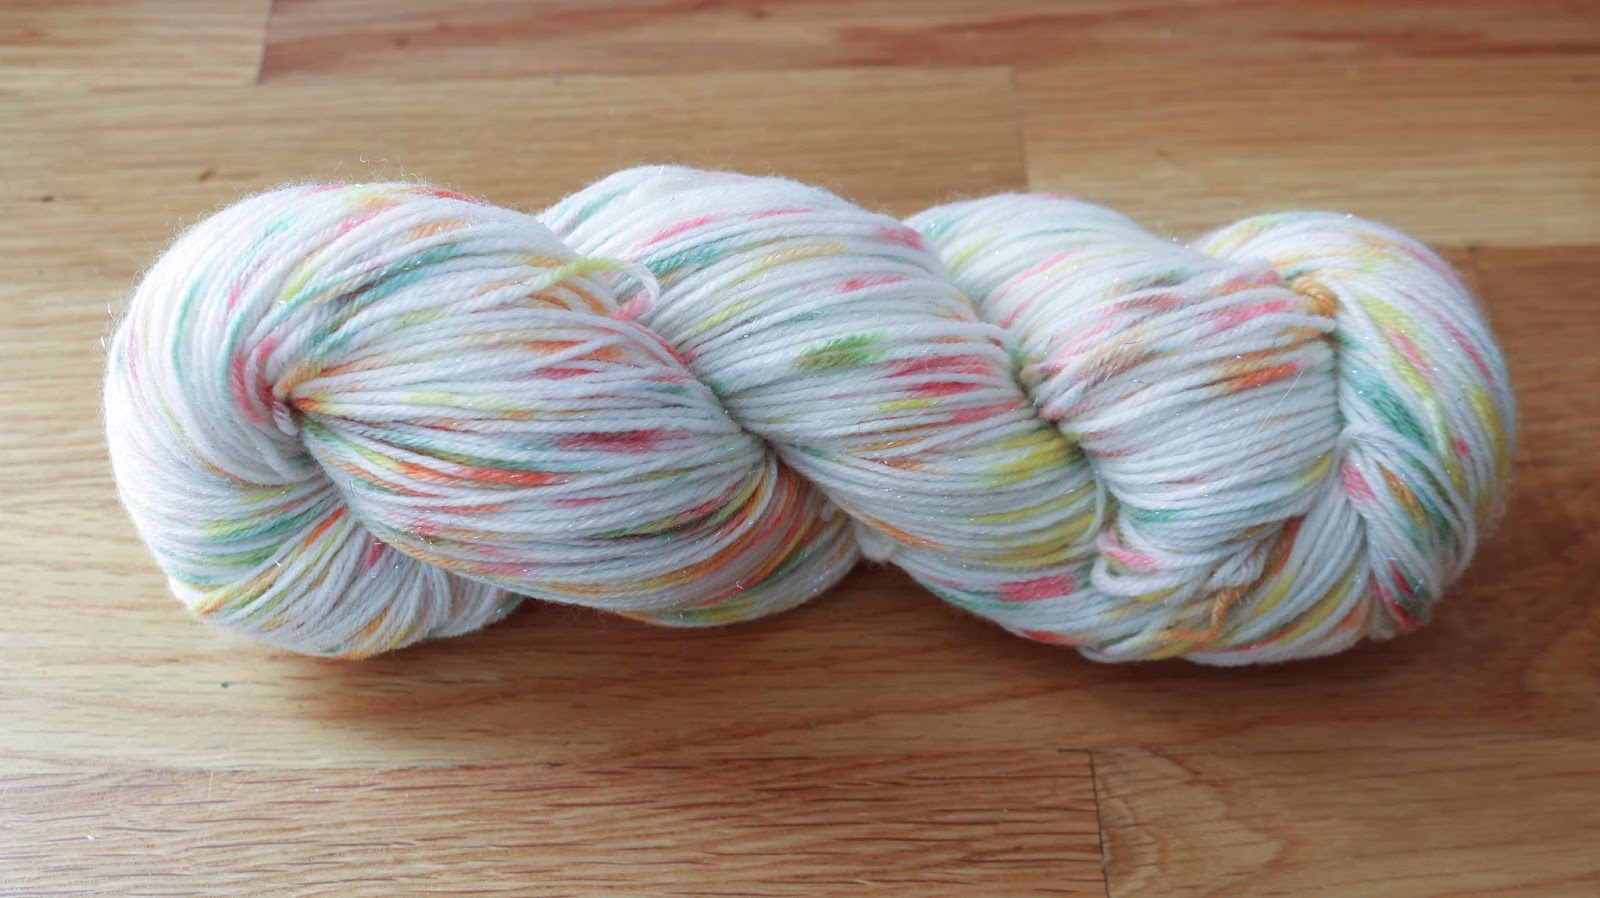 ChemKnits: My Quest for Speckled Yarn